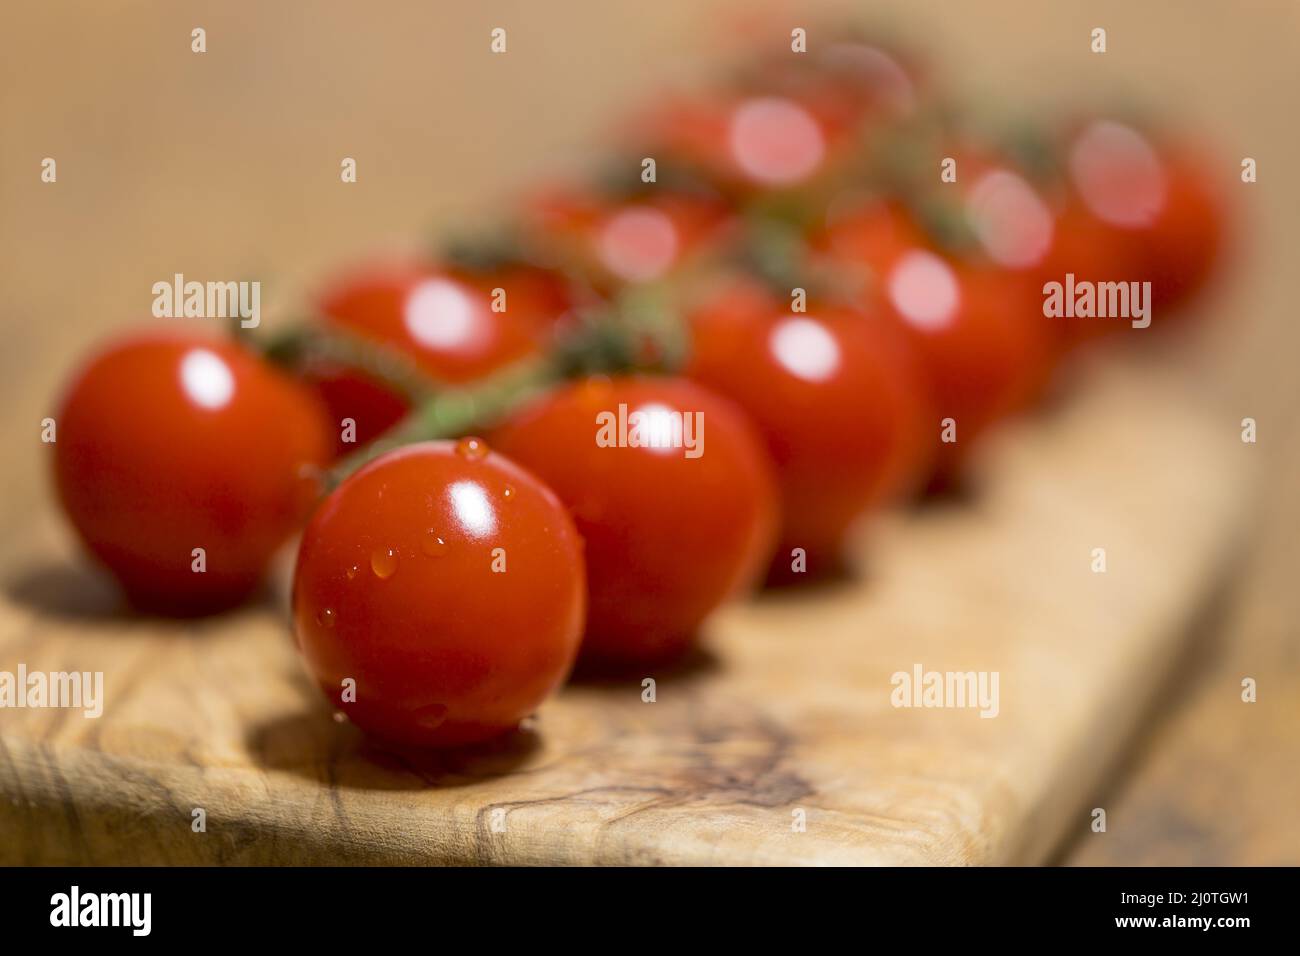 Row of raw tomatoes on wood Stock Photo